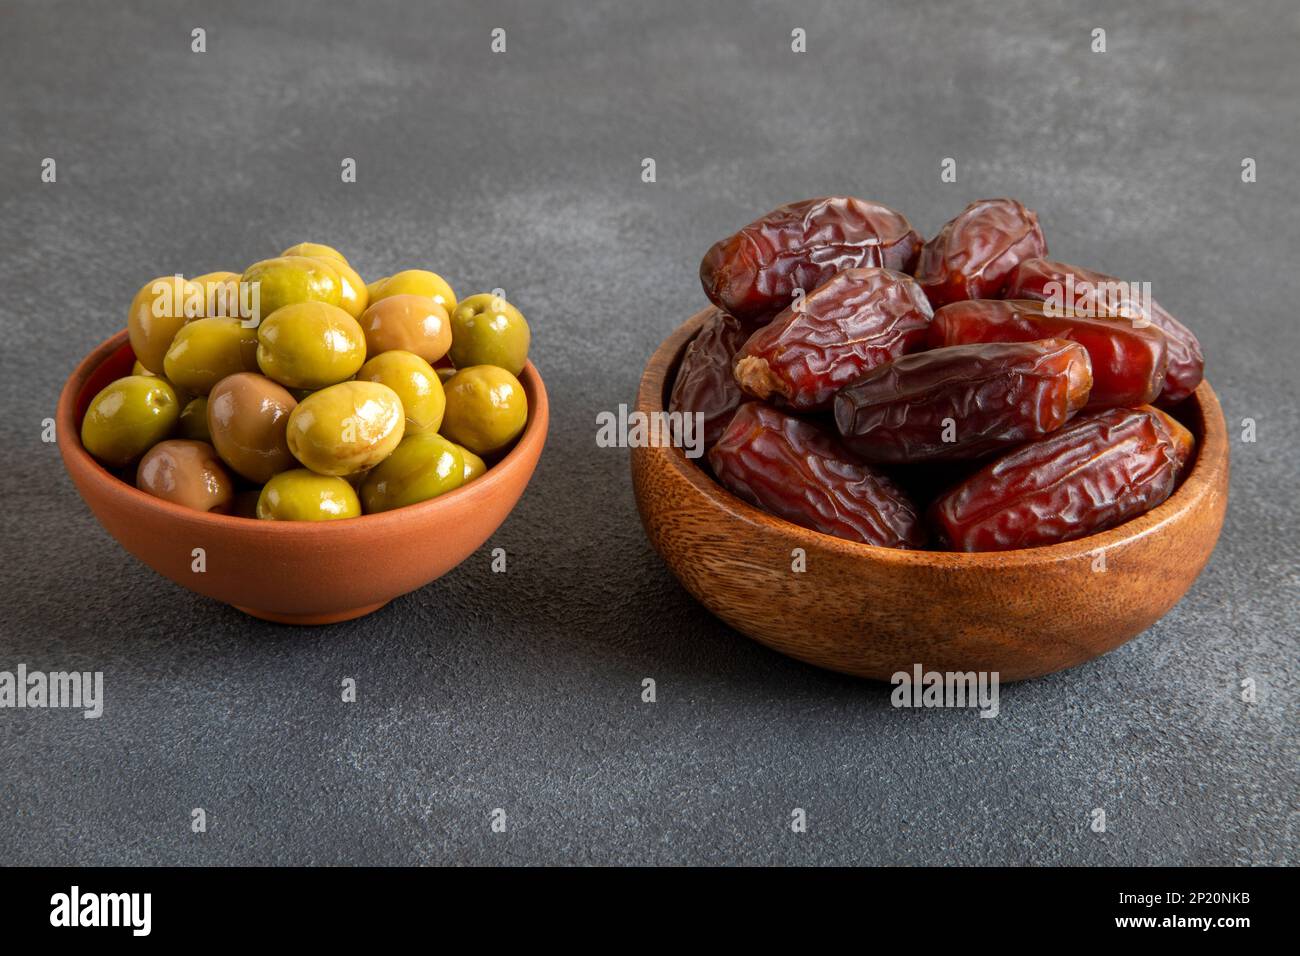 Date fruit with green olives on dark background Stock Photo